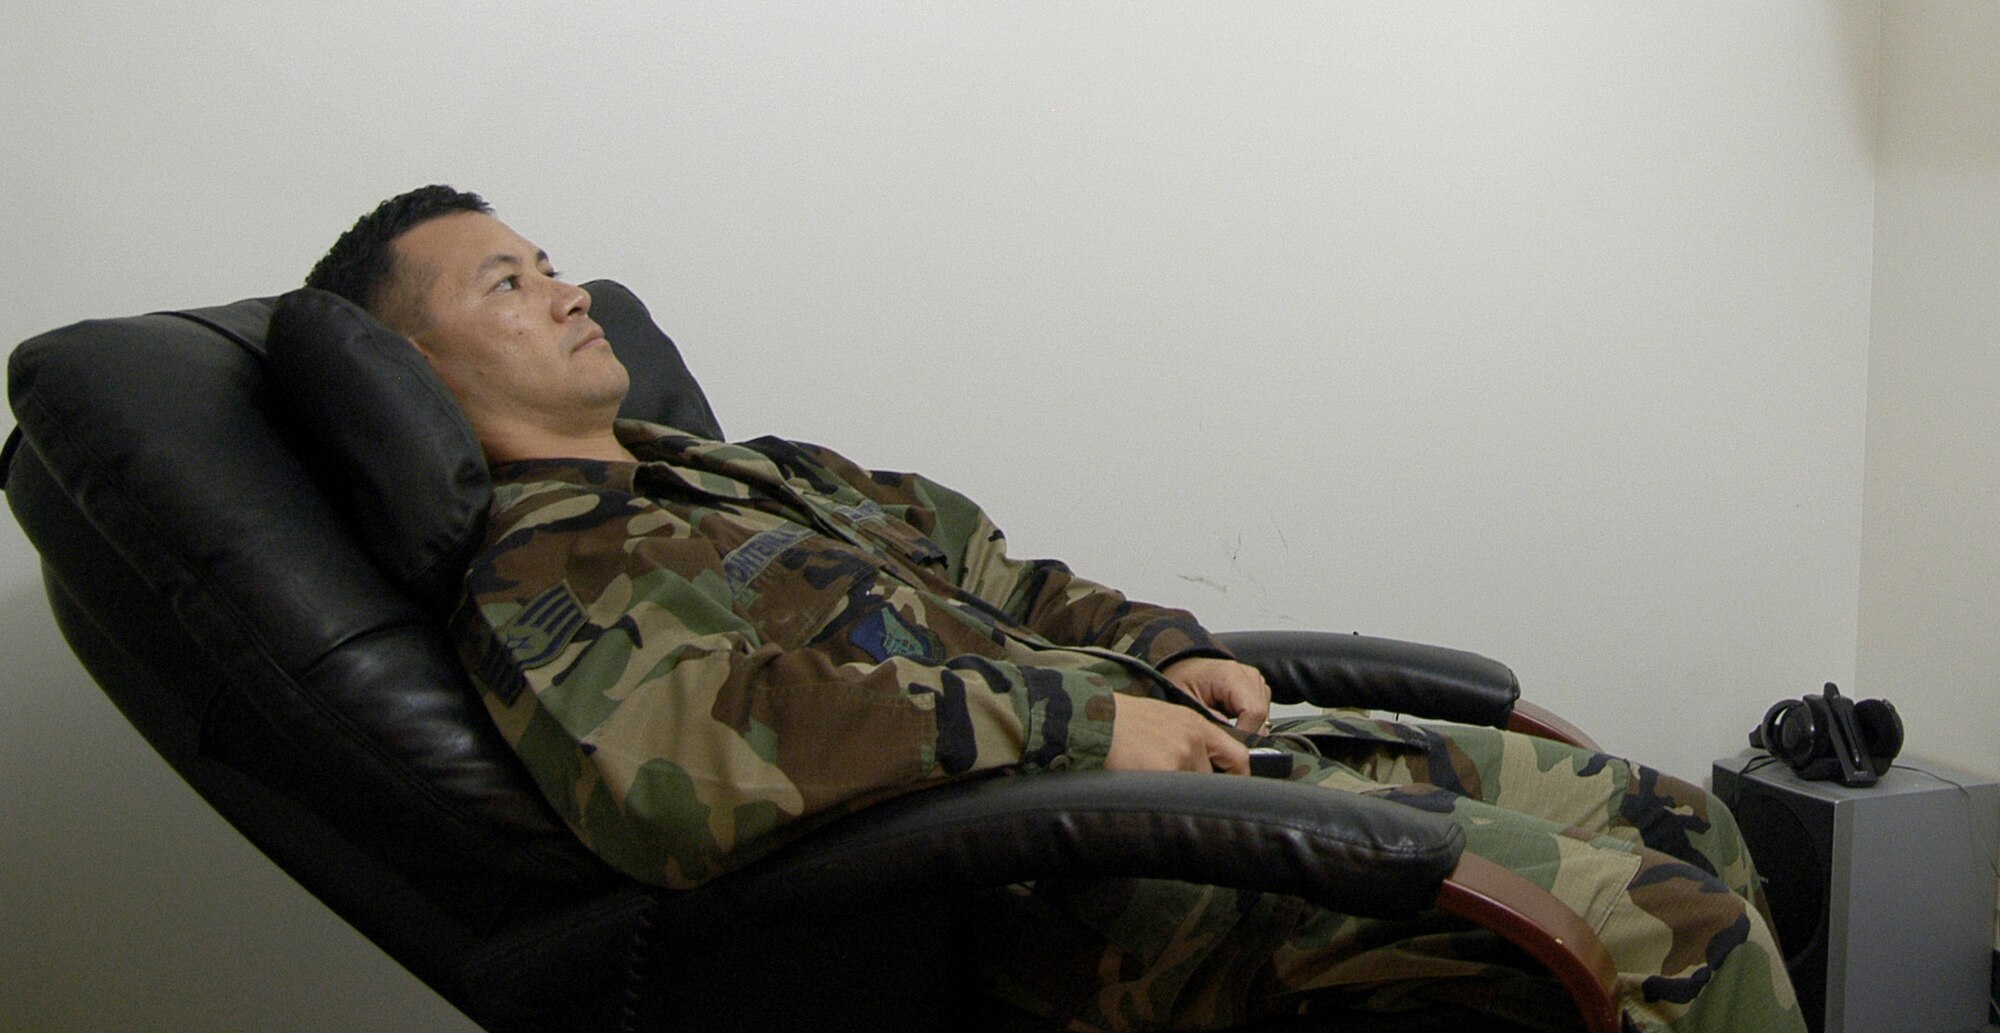 Staff Sgt. Max Pontenilla, 36th Services Squadron Fitness Program NCOIC, demonstrates the massage chair in the Relaxation Room at Andersen Air Force Base Health and Wellness Center. The HAWC is offering a variety classes in observance of "Healthy Weight Month." (U.S. Air Force photo/Master Sgt. Lisa Zunzanyika)                    